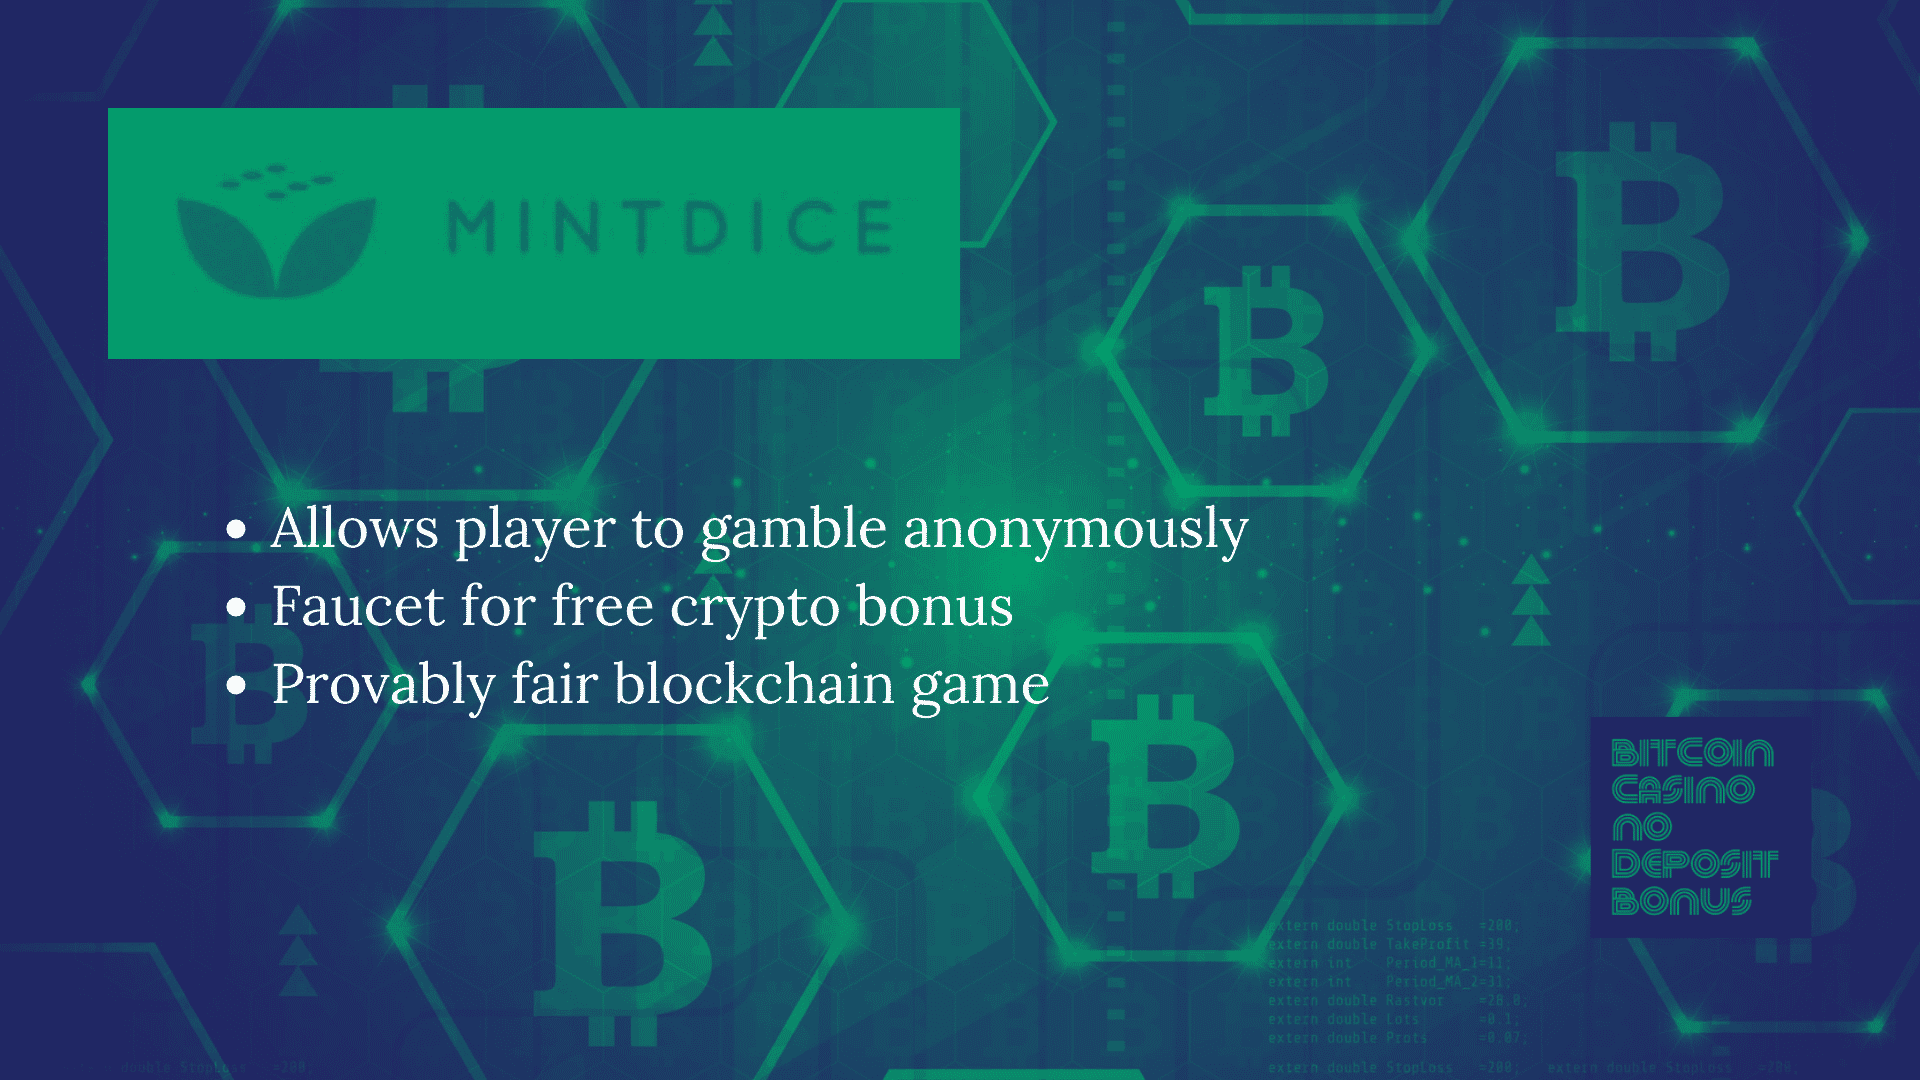 You are currently viewing Mint Dice Bonus Codes – Mintdice.com Free Coupons November 2022